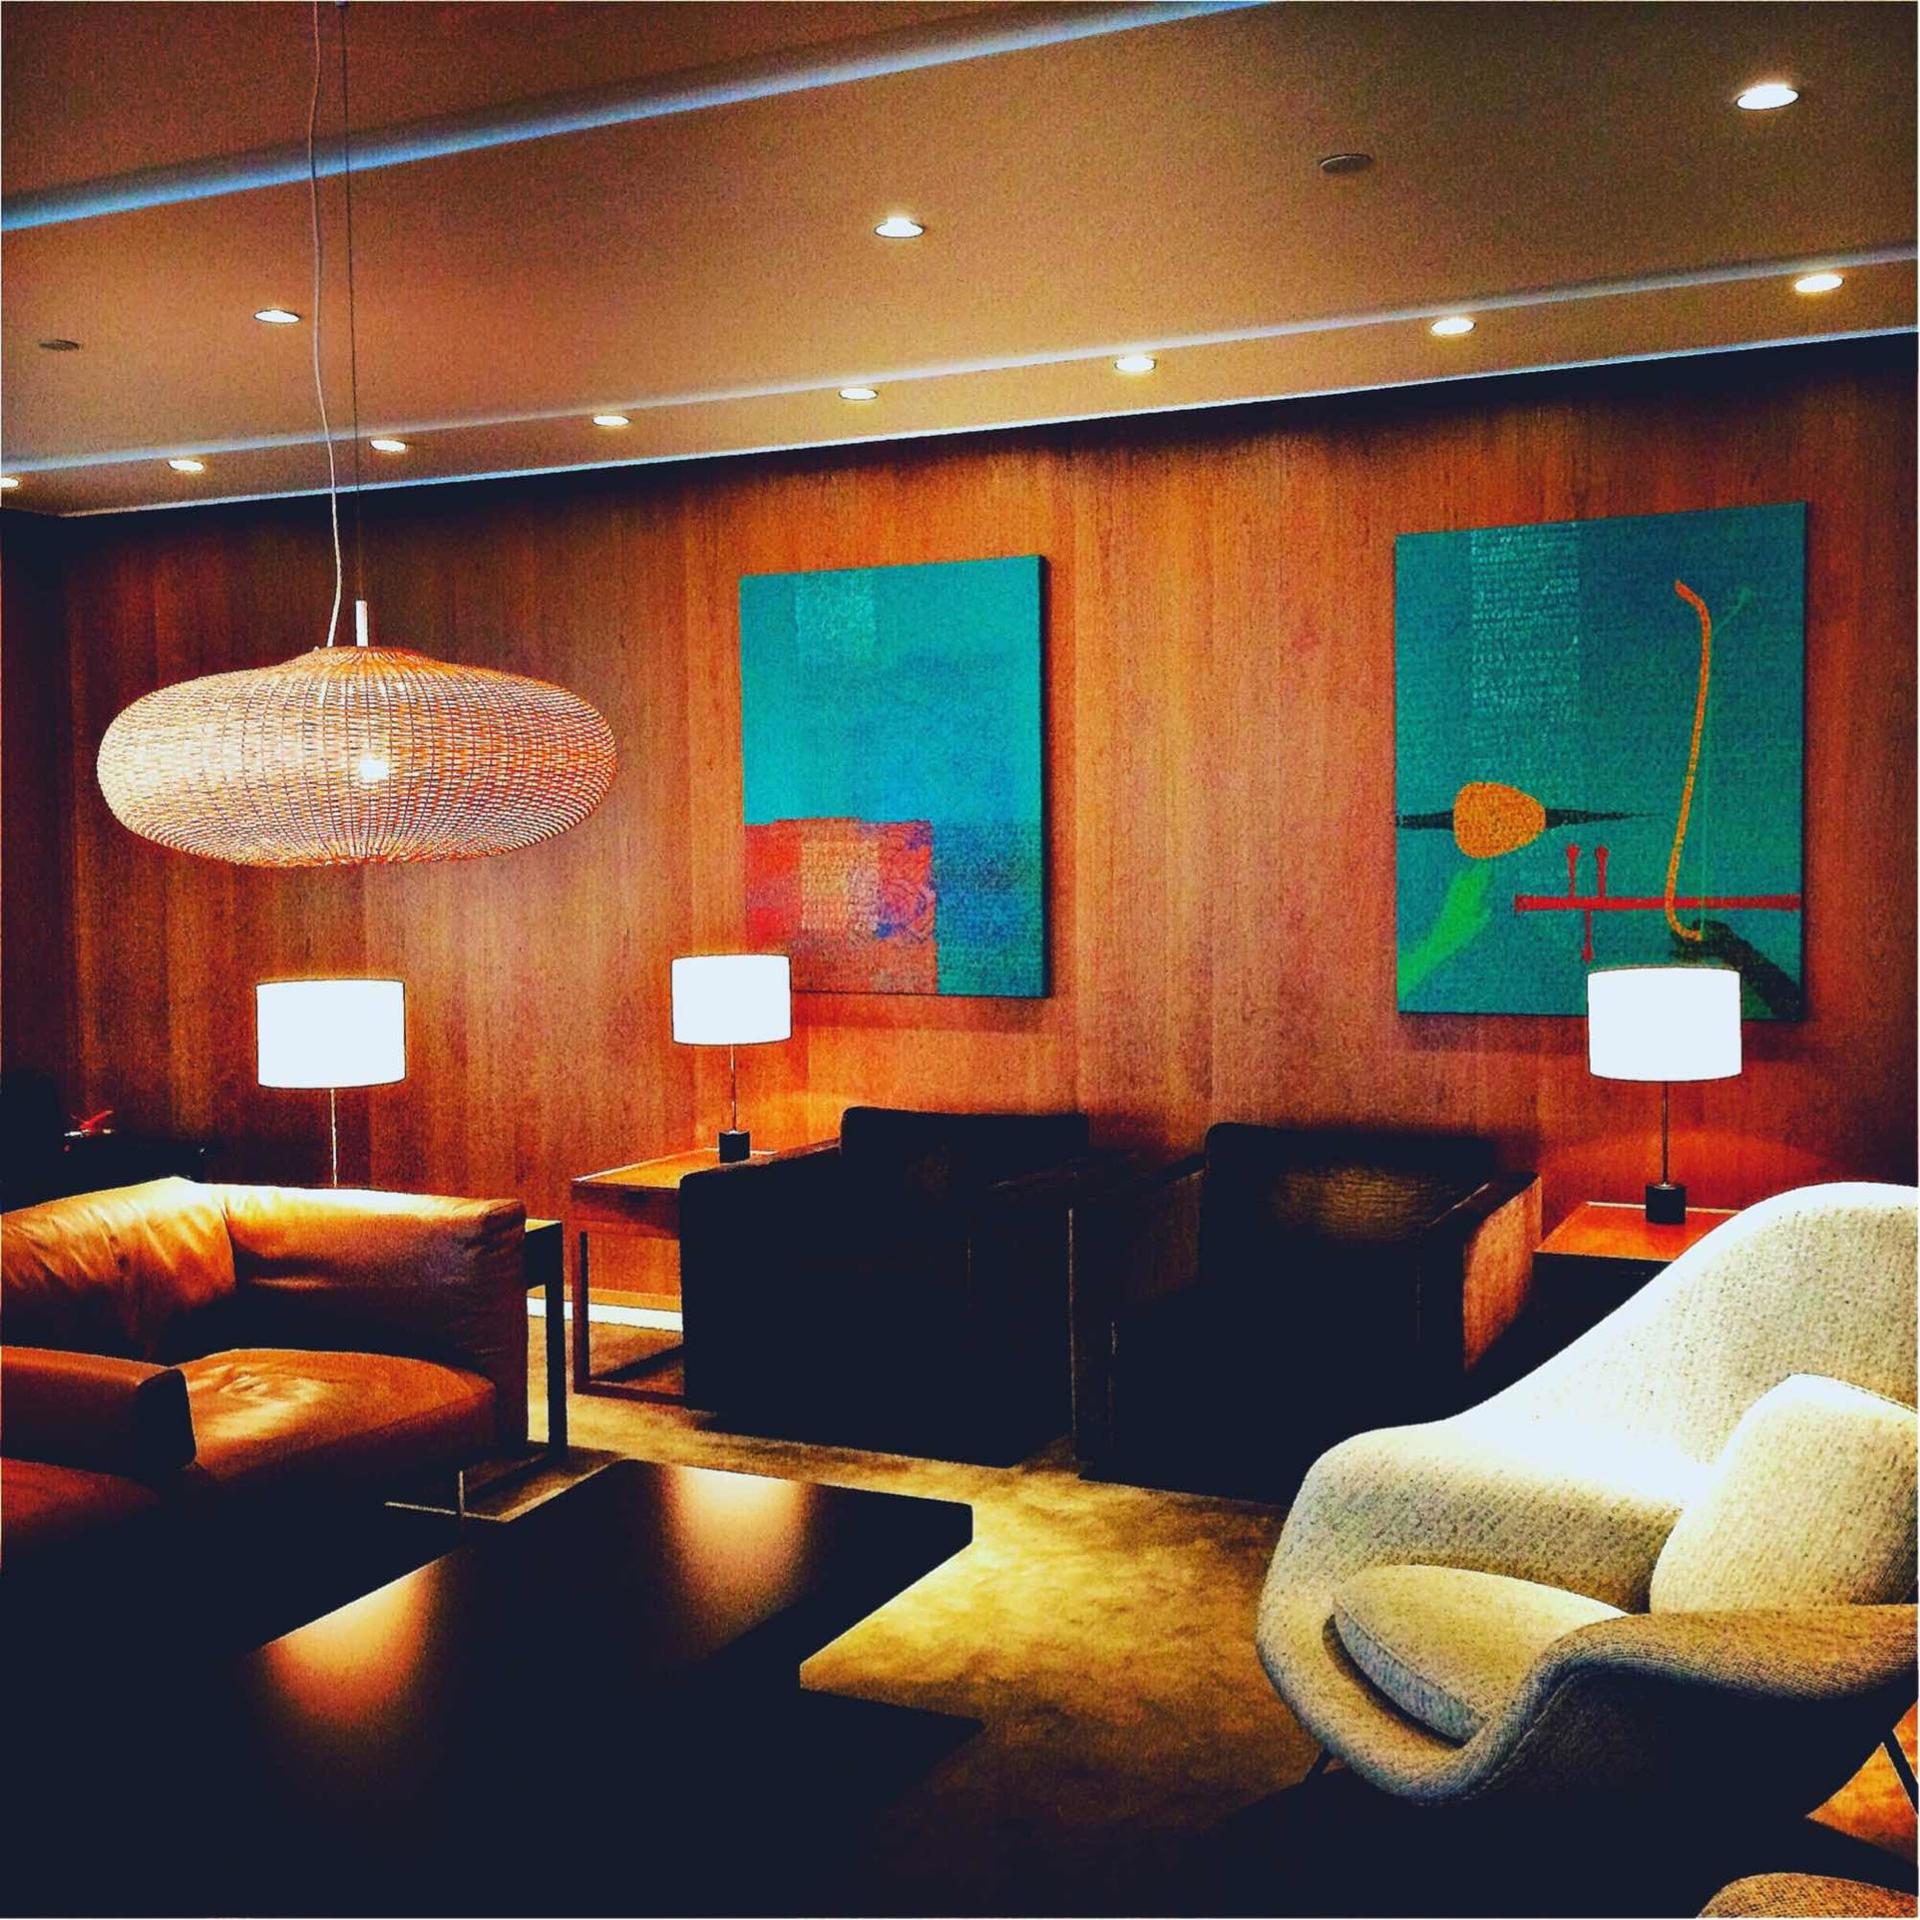 Cathay Pacific First and Business Class Lounge image 1 of 69